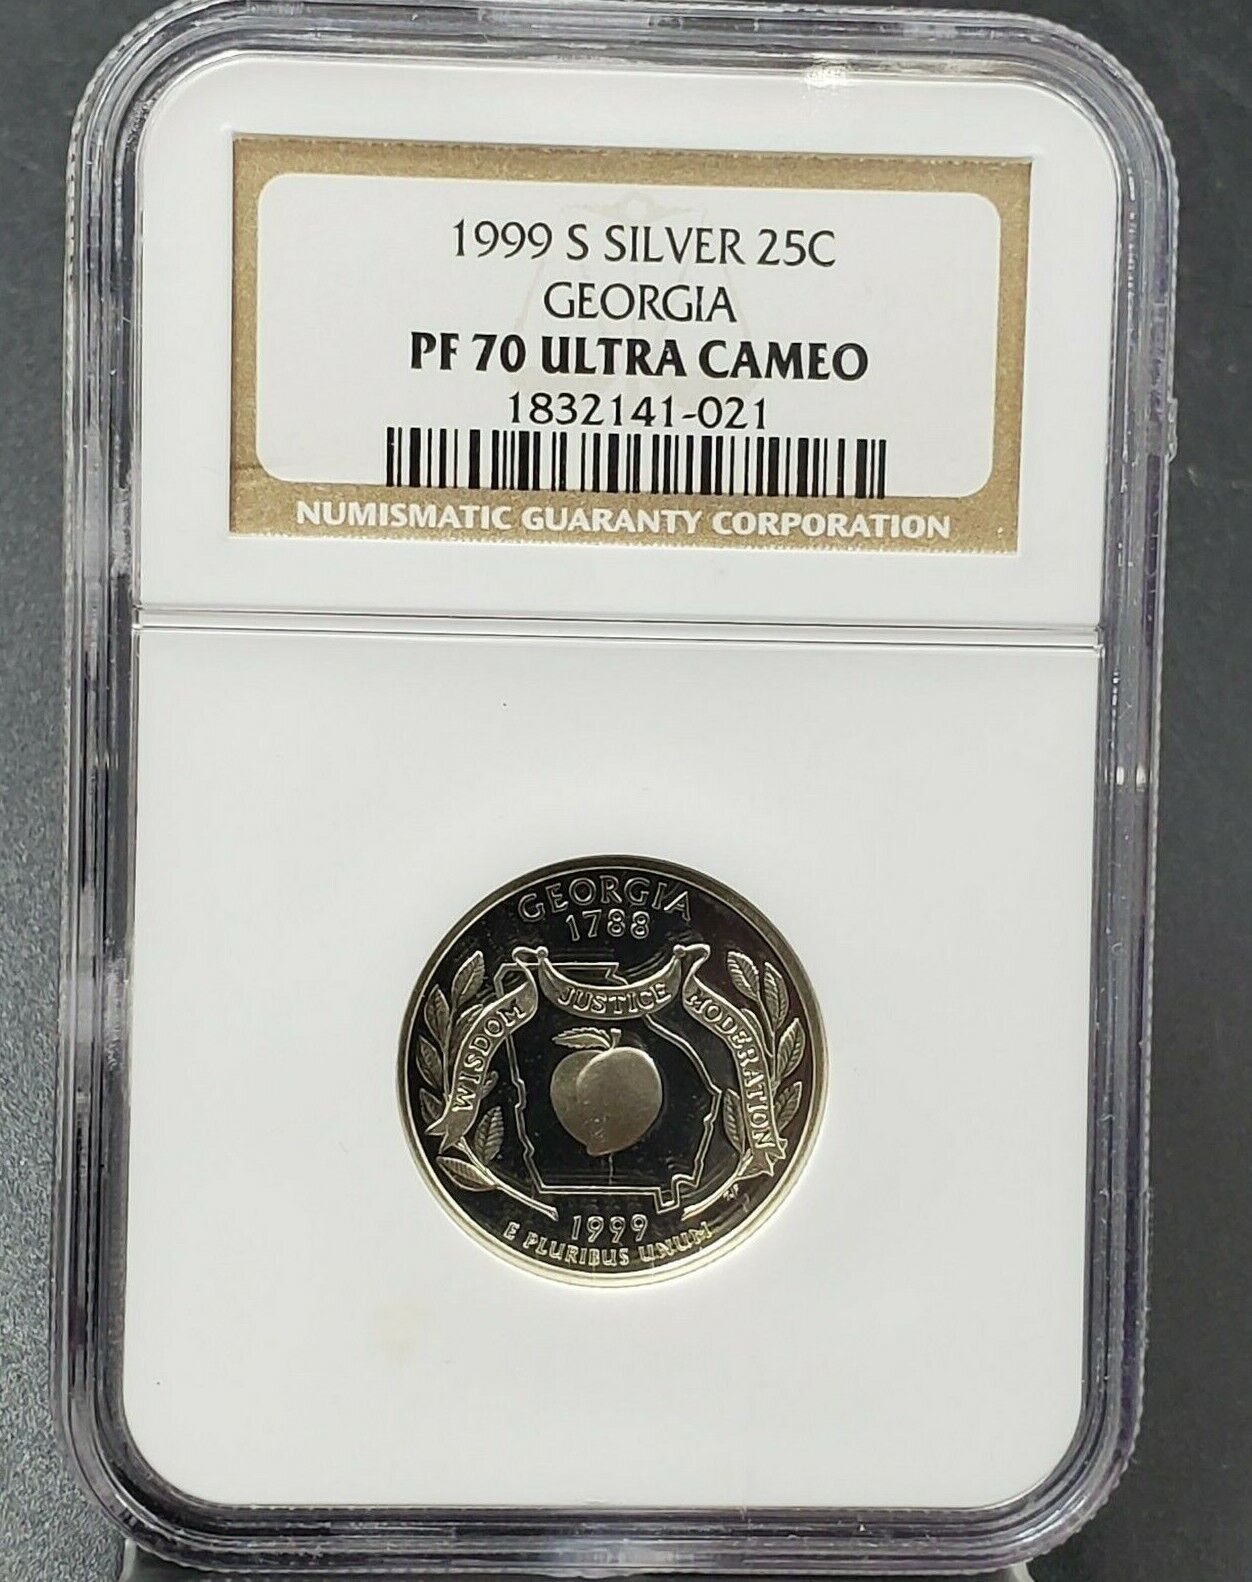 1999 S Georgia SILVER State Statehood Quarter Coin NGC PF70 UCAM DCAM PROOF